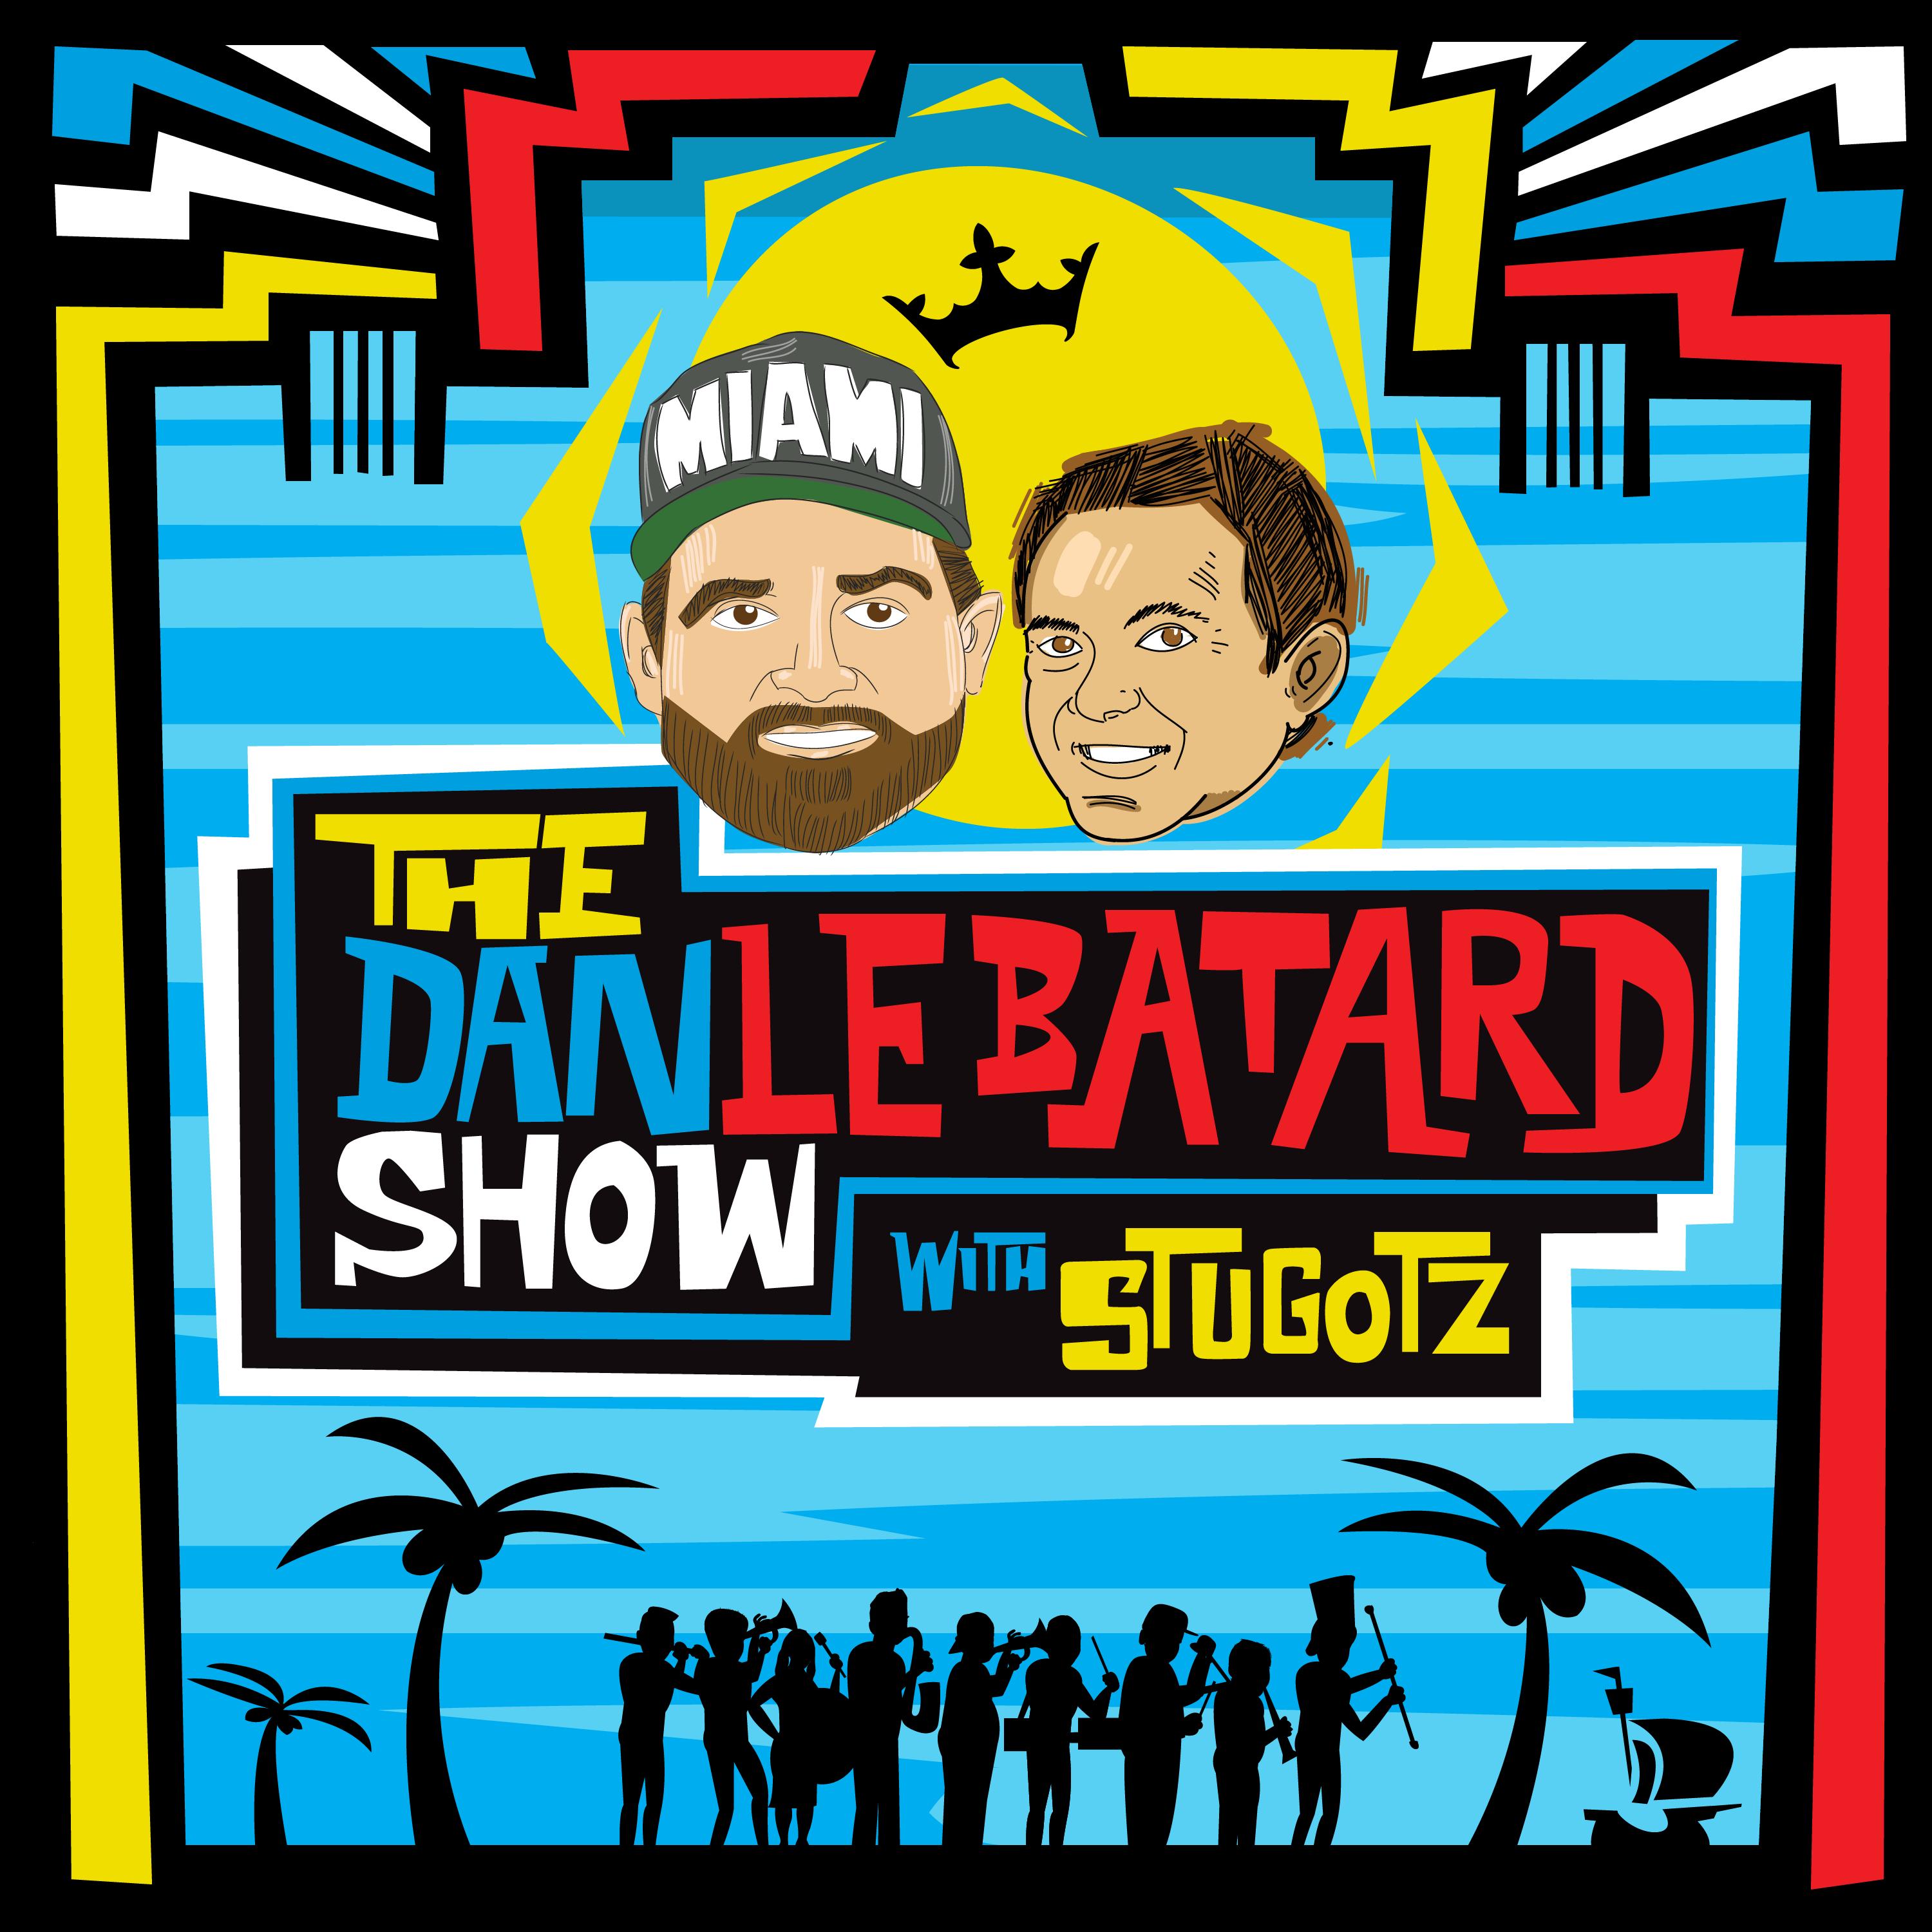 Advertise on The Dan Le Batard Show with AudioGO